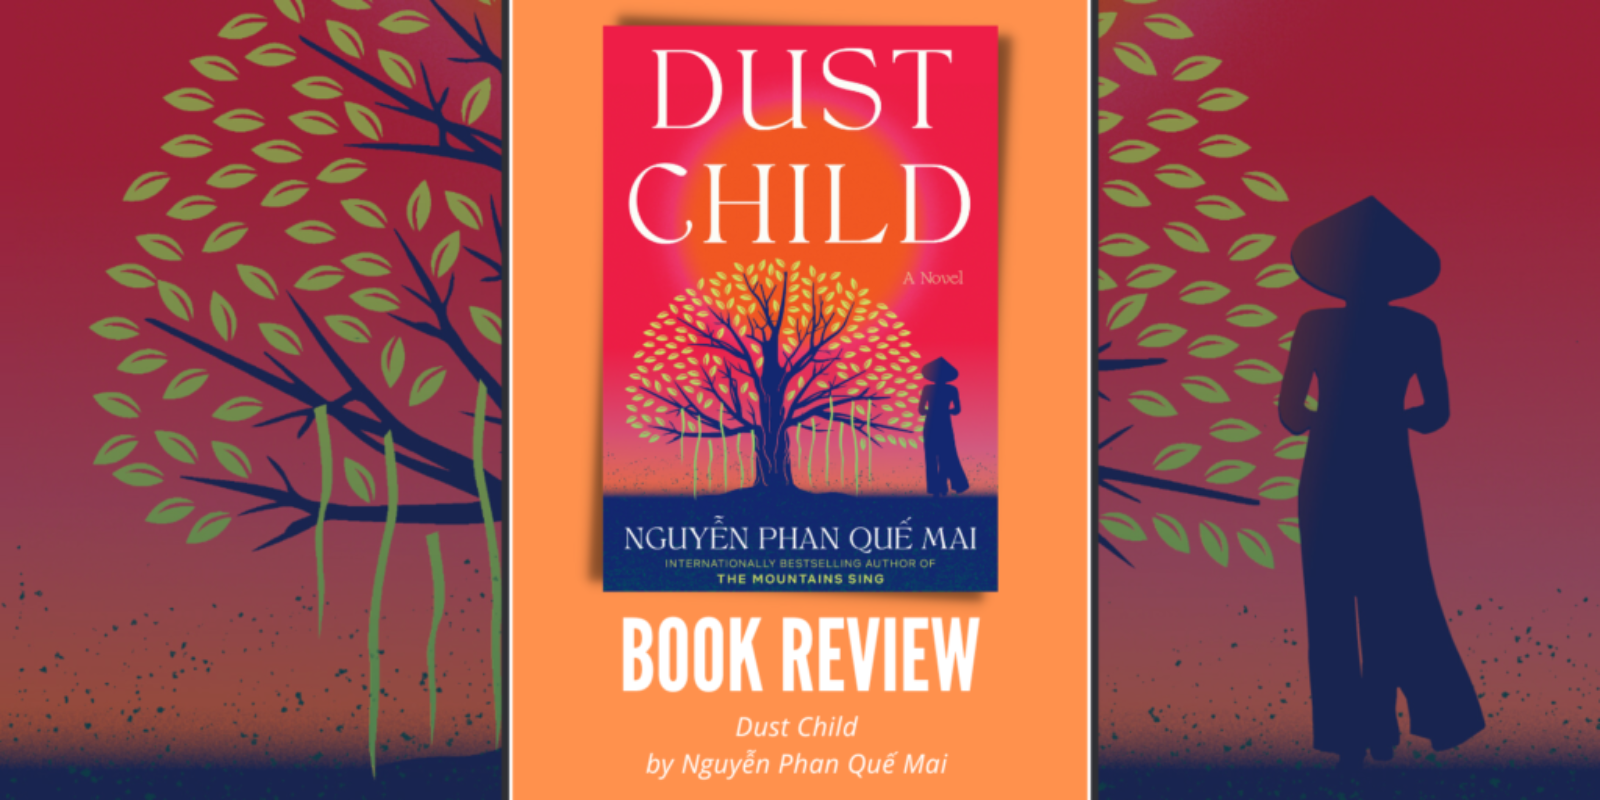 Dust Child by Nguyen Phan Que Mai Book Review